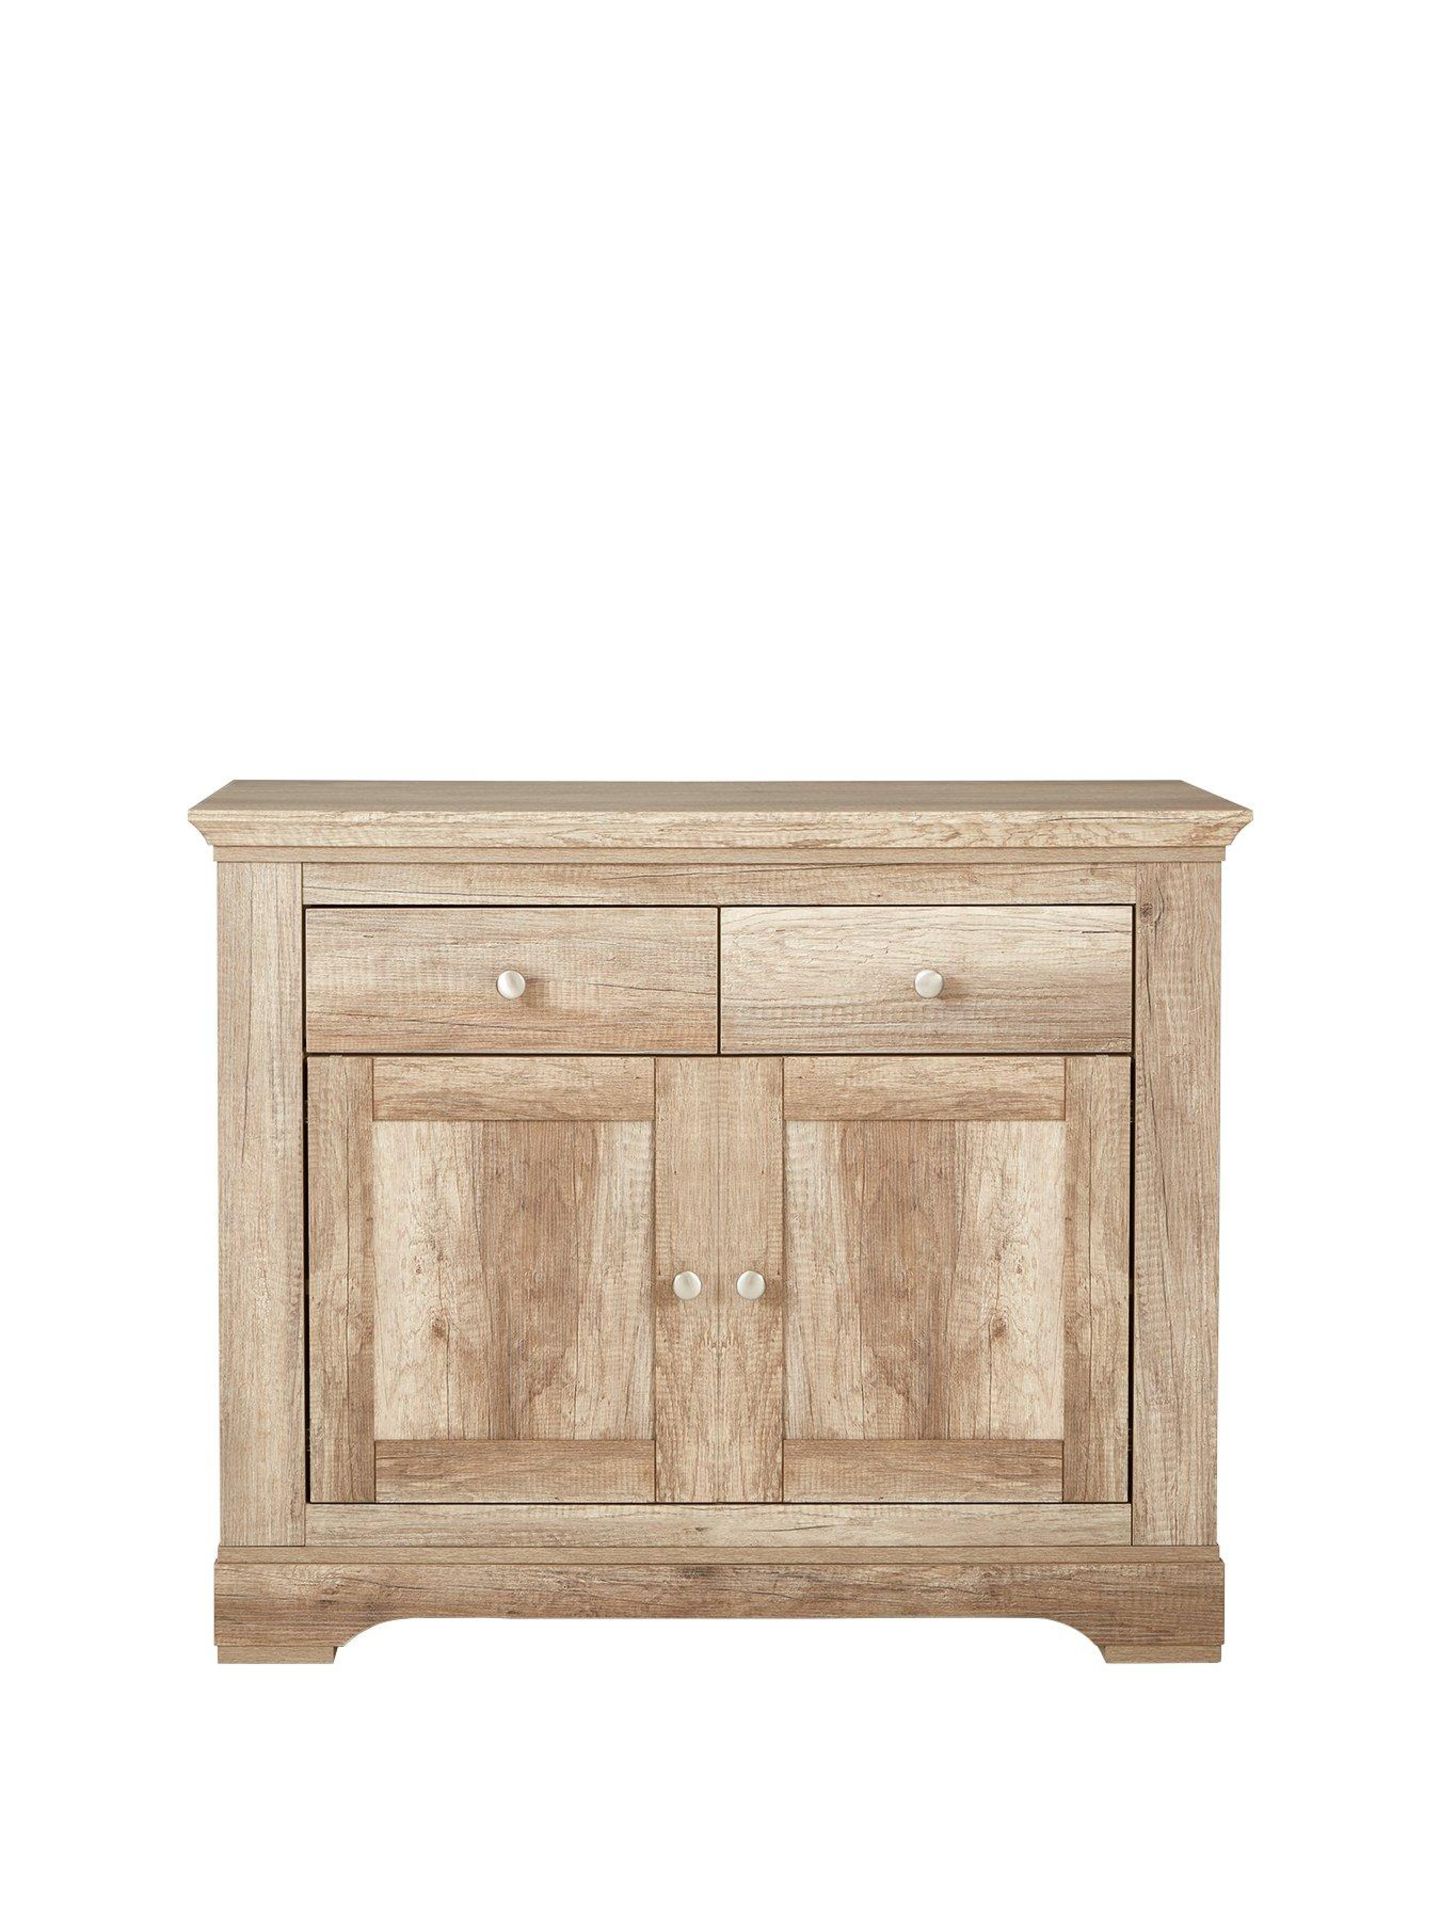 Boxed Item Ideal Home Wiltshire 2 Doors 2 Drawers Compact Sideboard [Oak] 83X99X43Cm rrp, £286.0